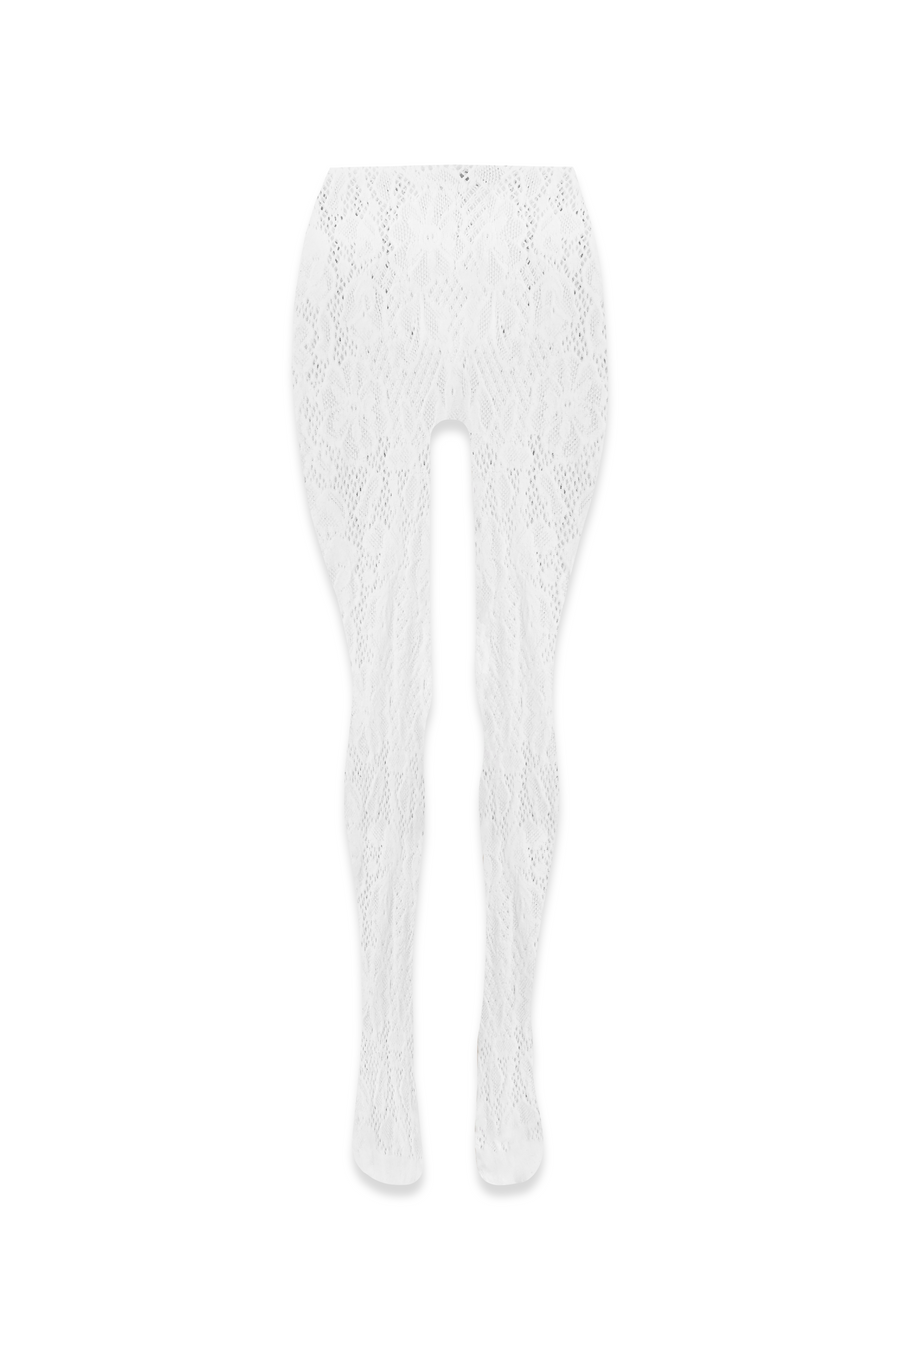 Altar Lace Tights in White